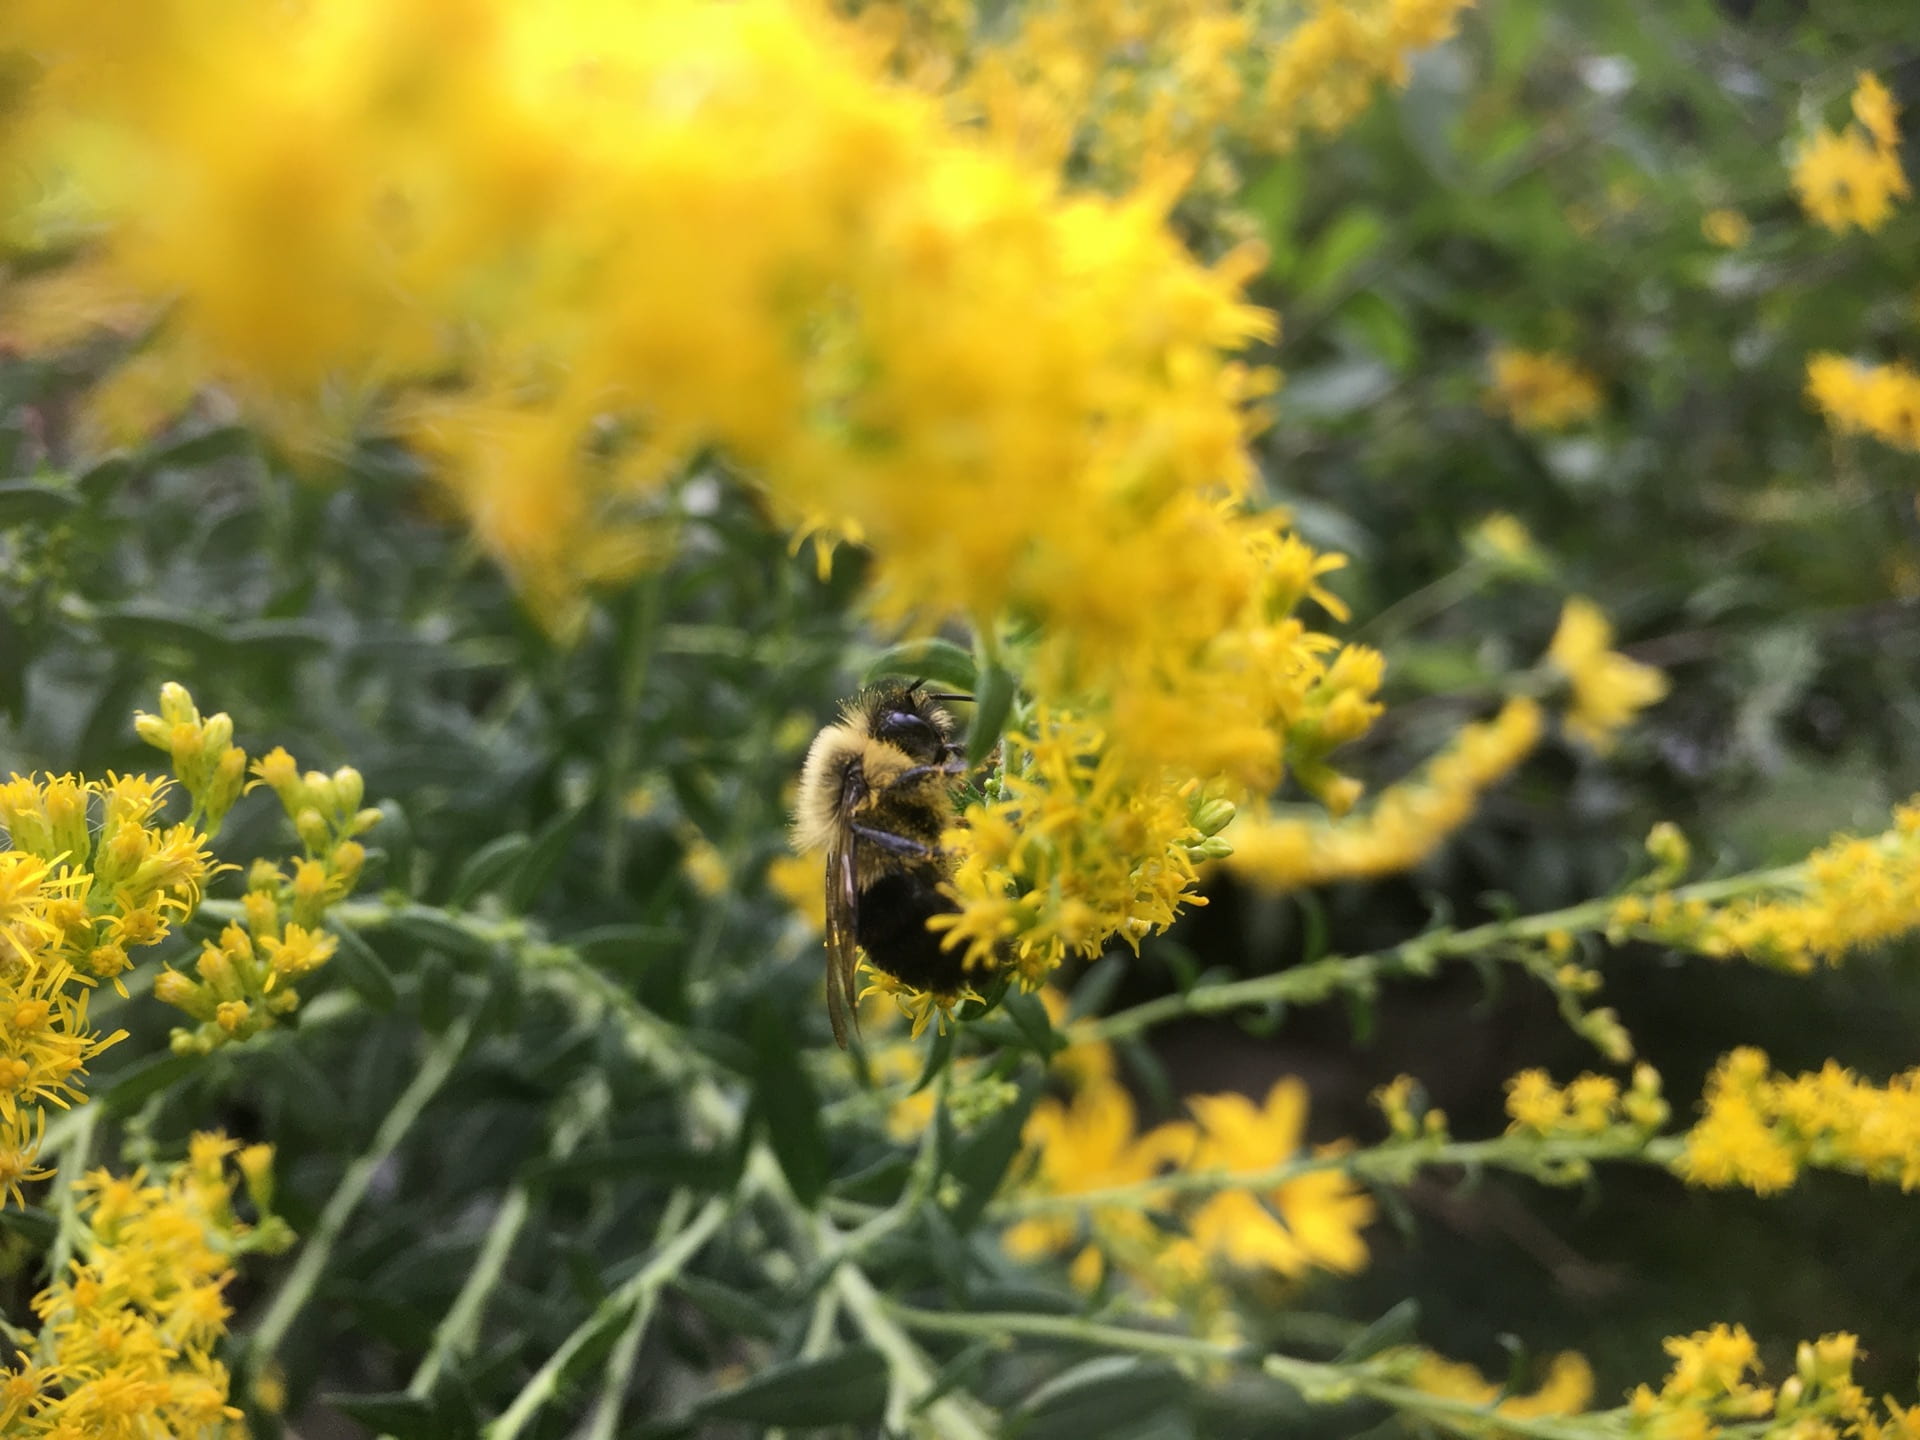 A bumble bee visits Solidago flowers.